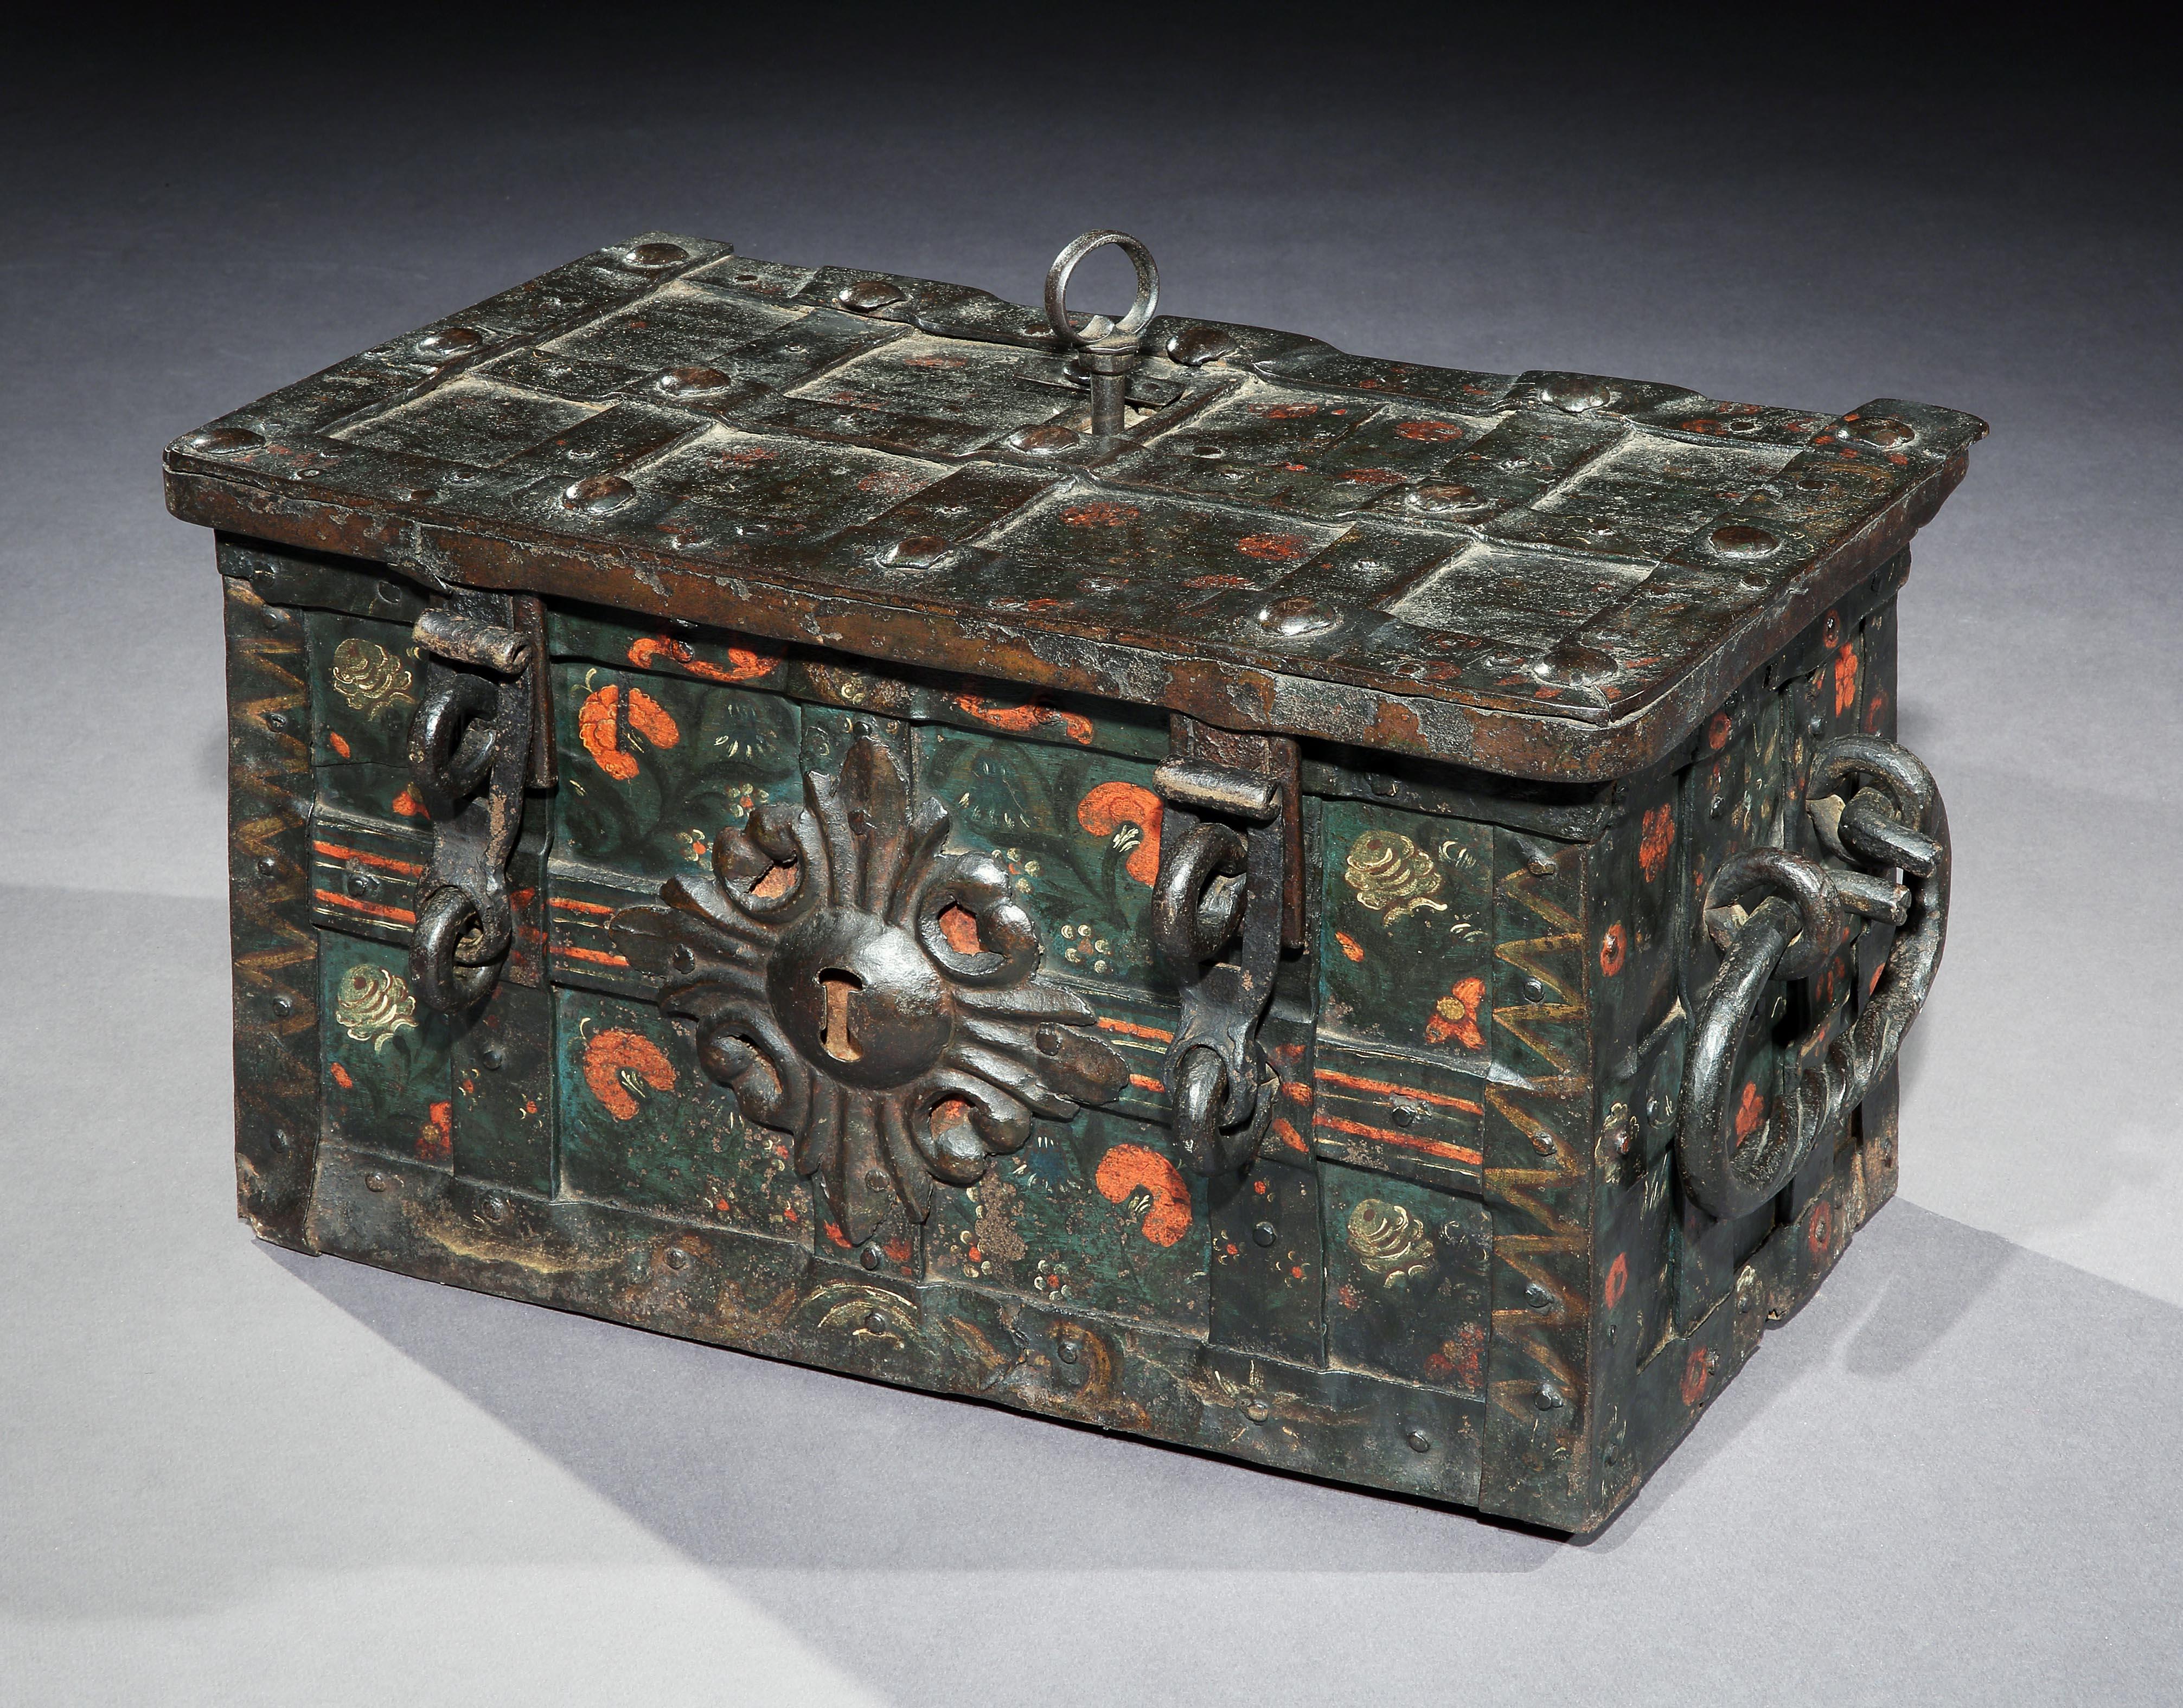 Exceptional, small, late-renaissance, table-top, Nuremberg, iron, 'armada box', strongbox or travelling safe with its original, naïve, painted decoration

This is a rare, small, table-top, example of these characterful, early models of